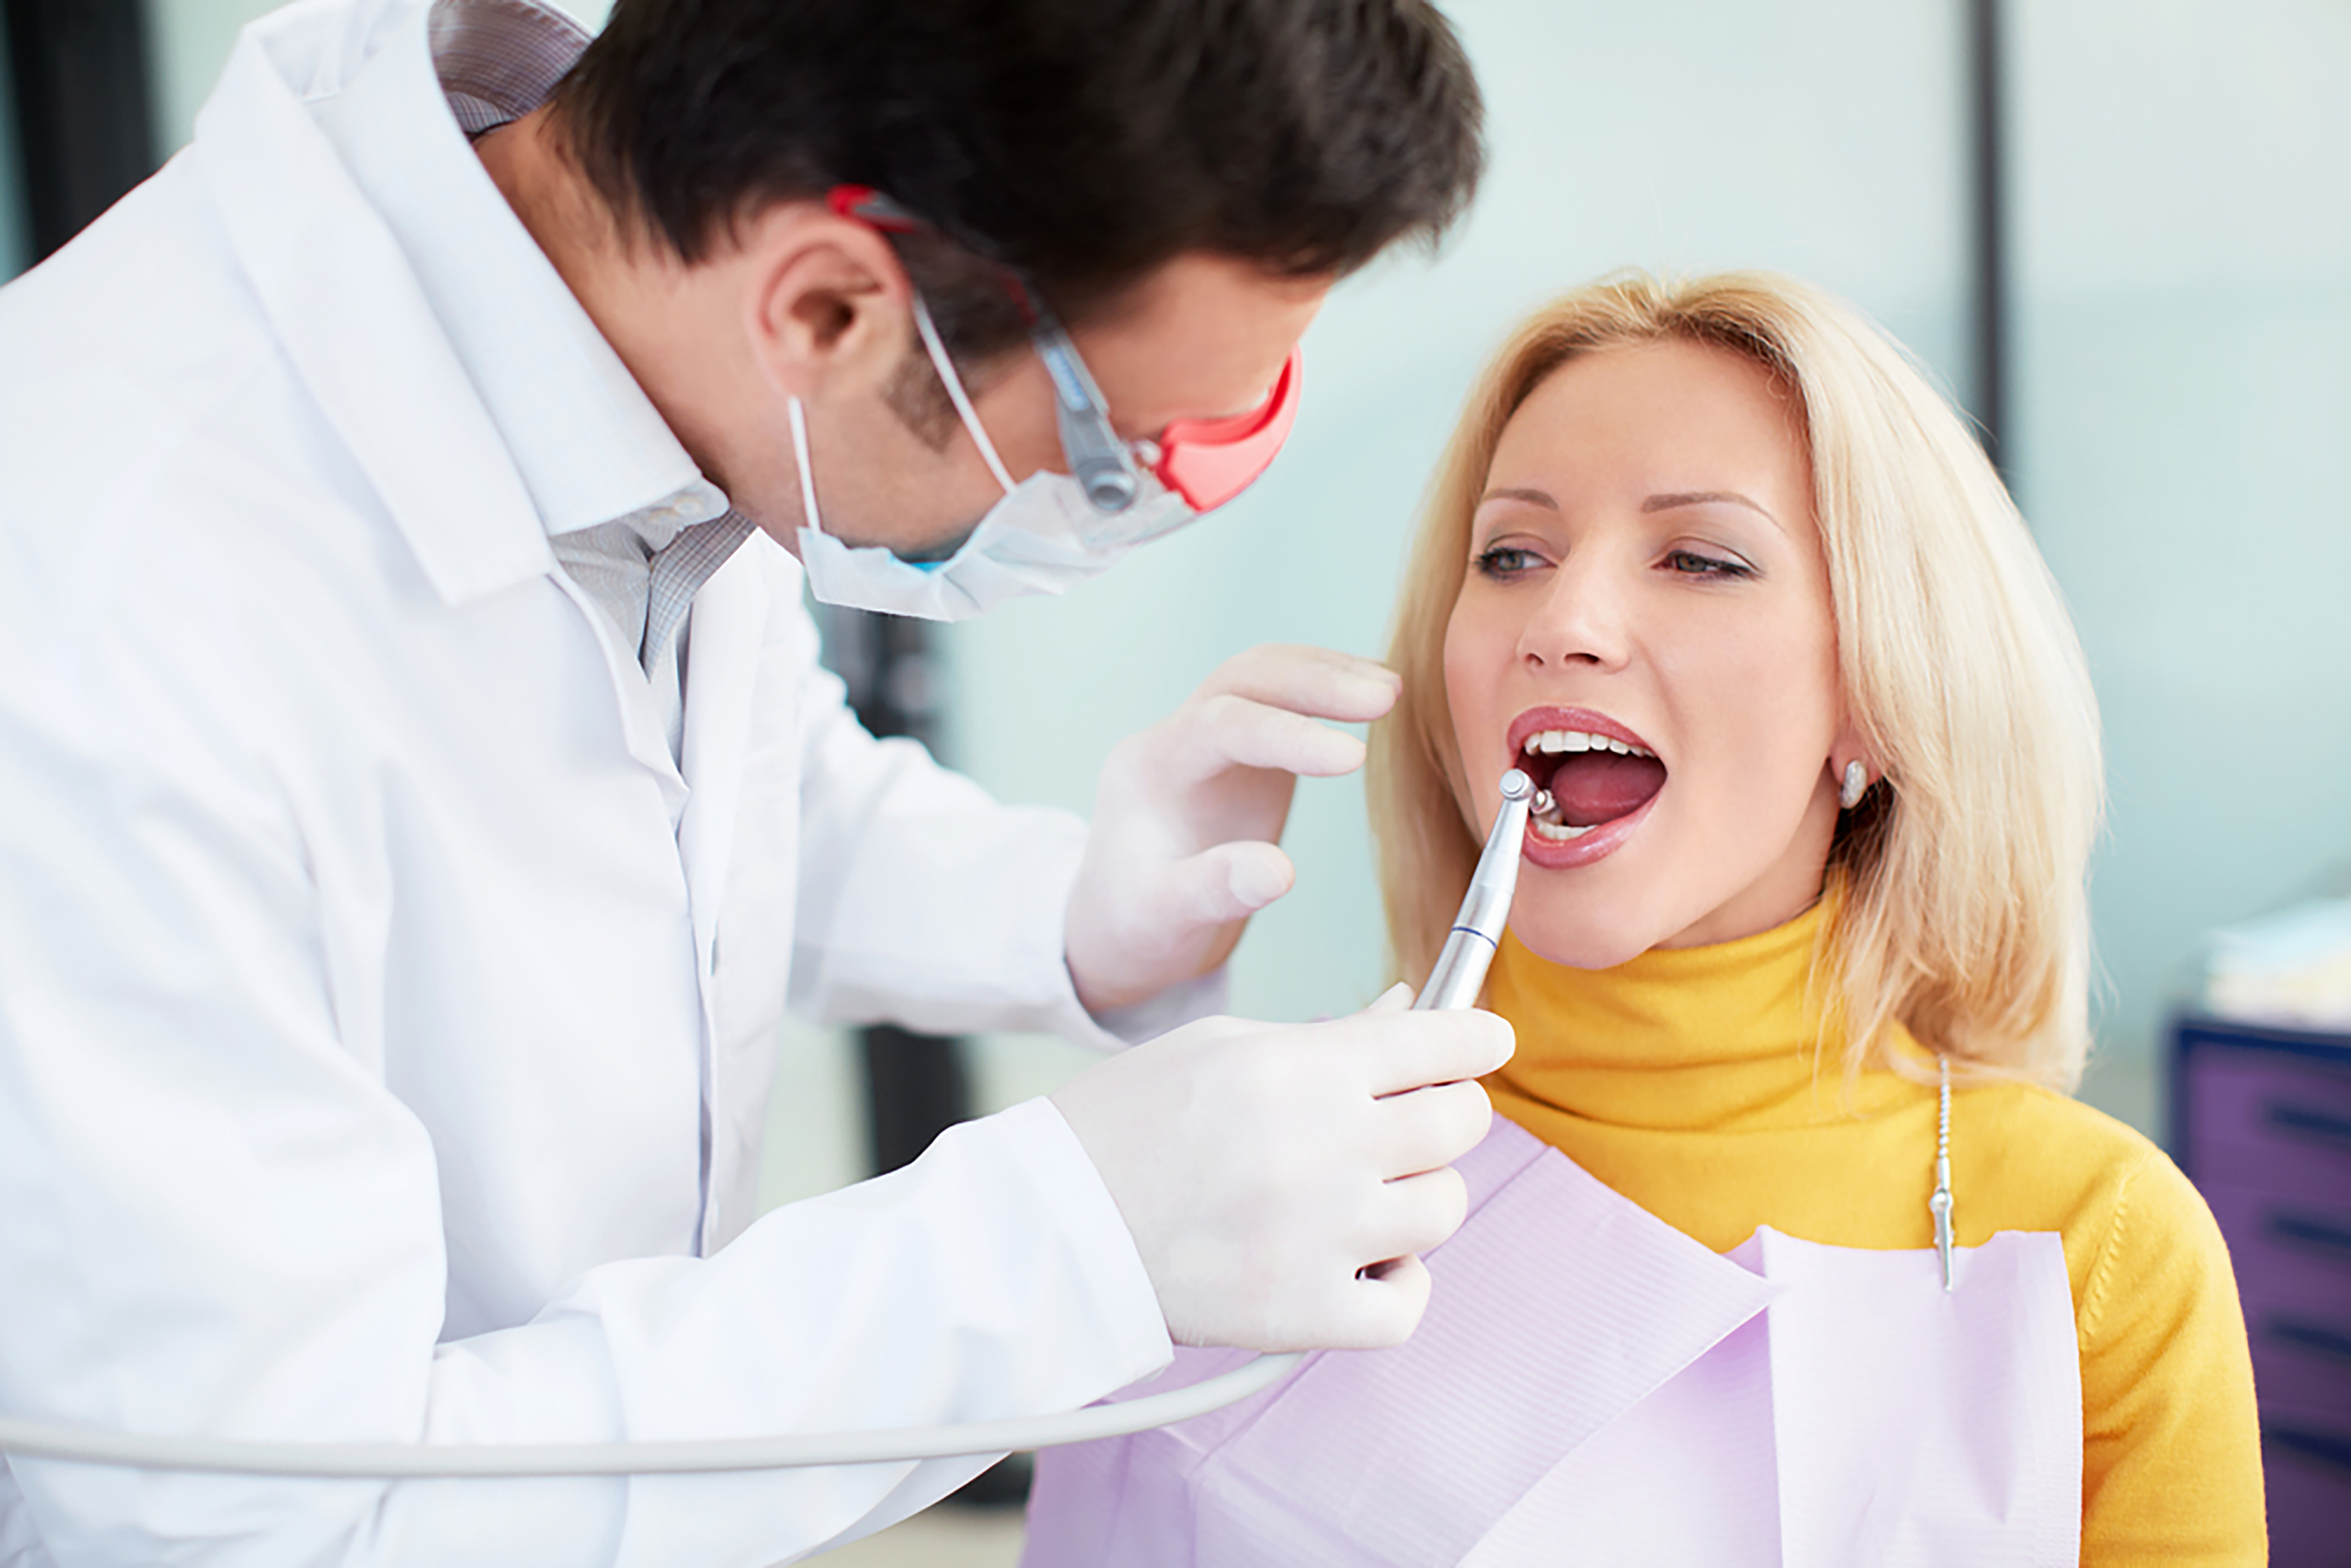 Why Do Dentists Screen For Oral Cancer